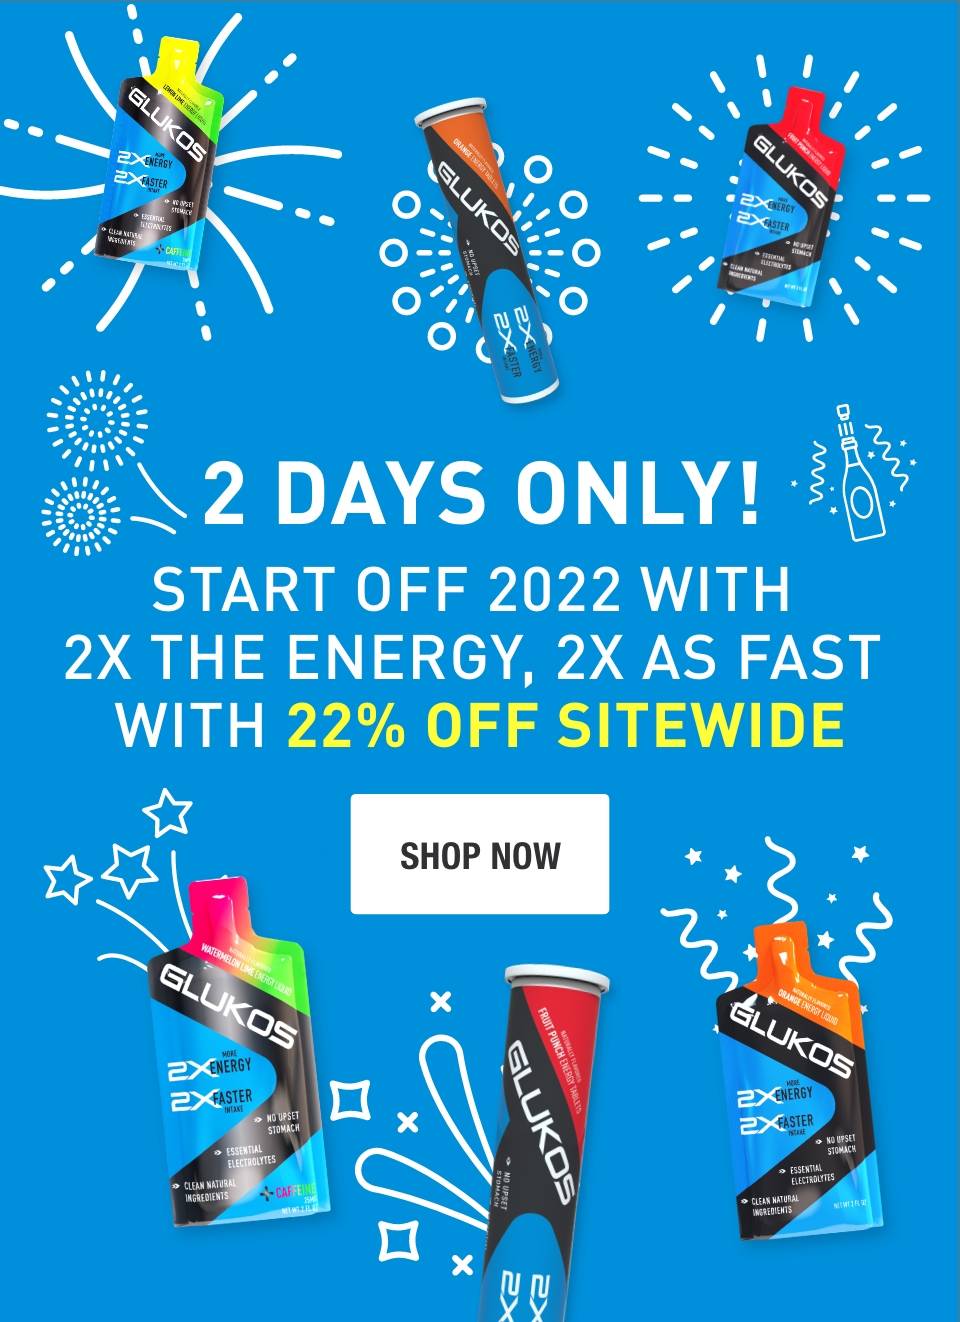 2 Days Only! Start off 2022 with 2x the energy, 2x as fast with 22% off sitewide. Shop Now